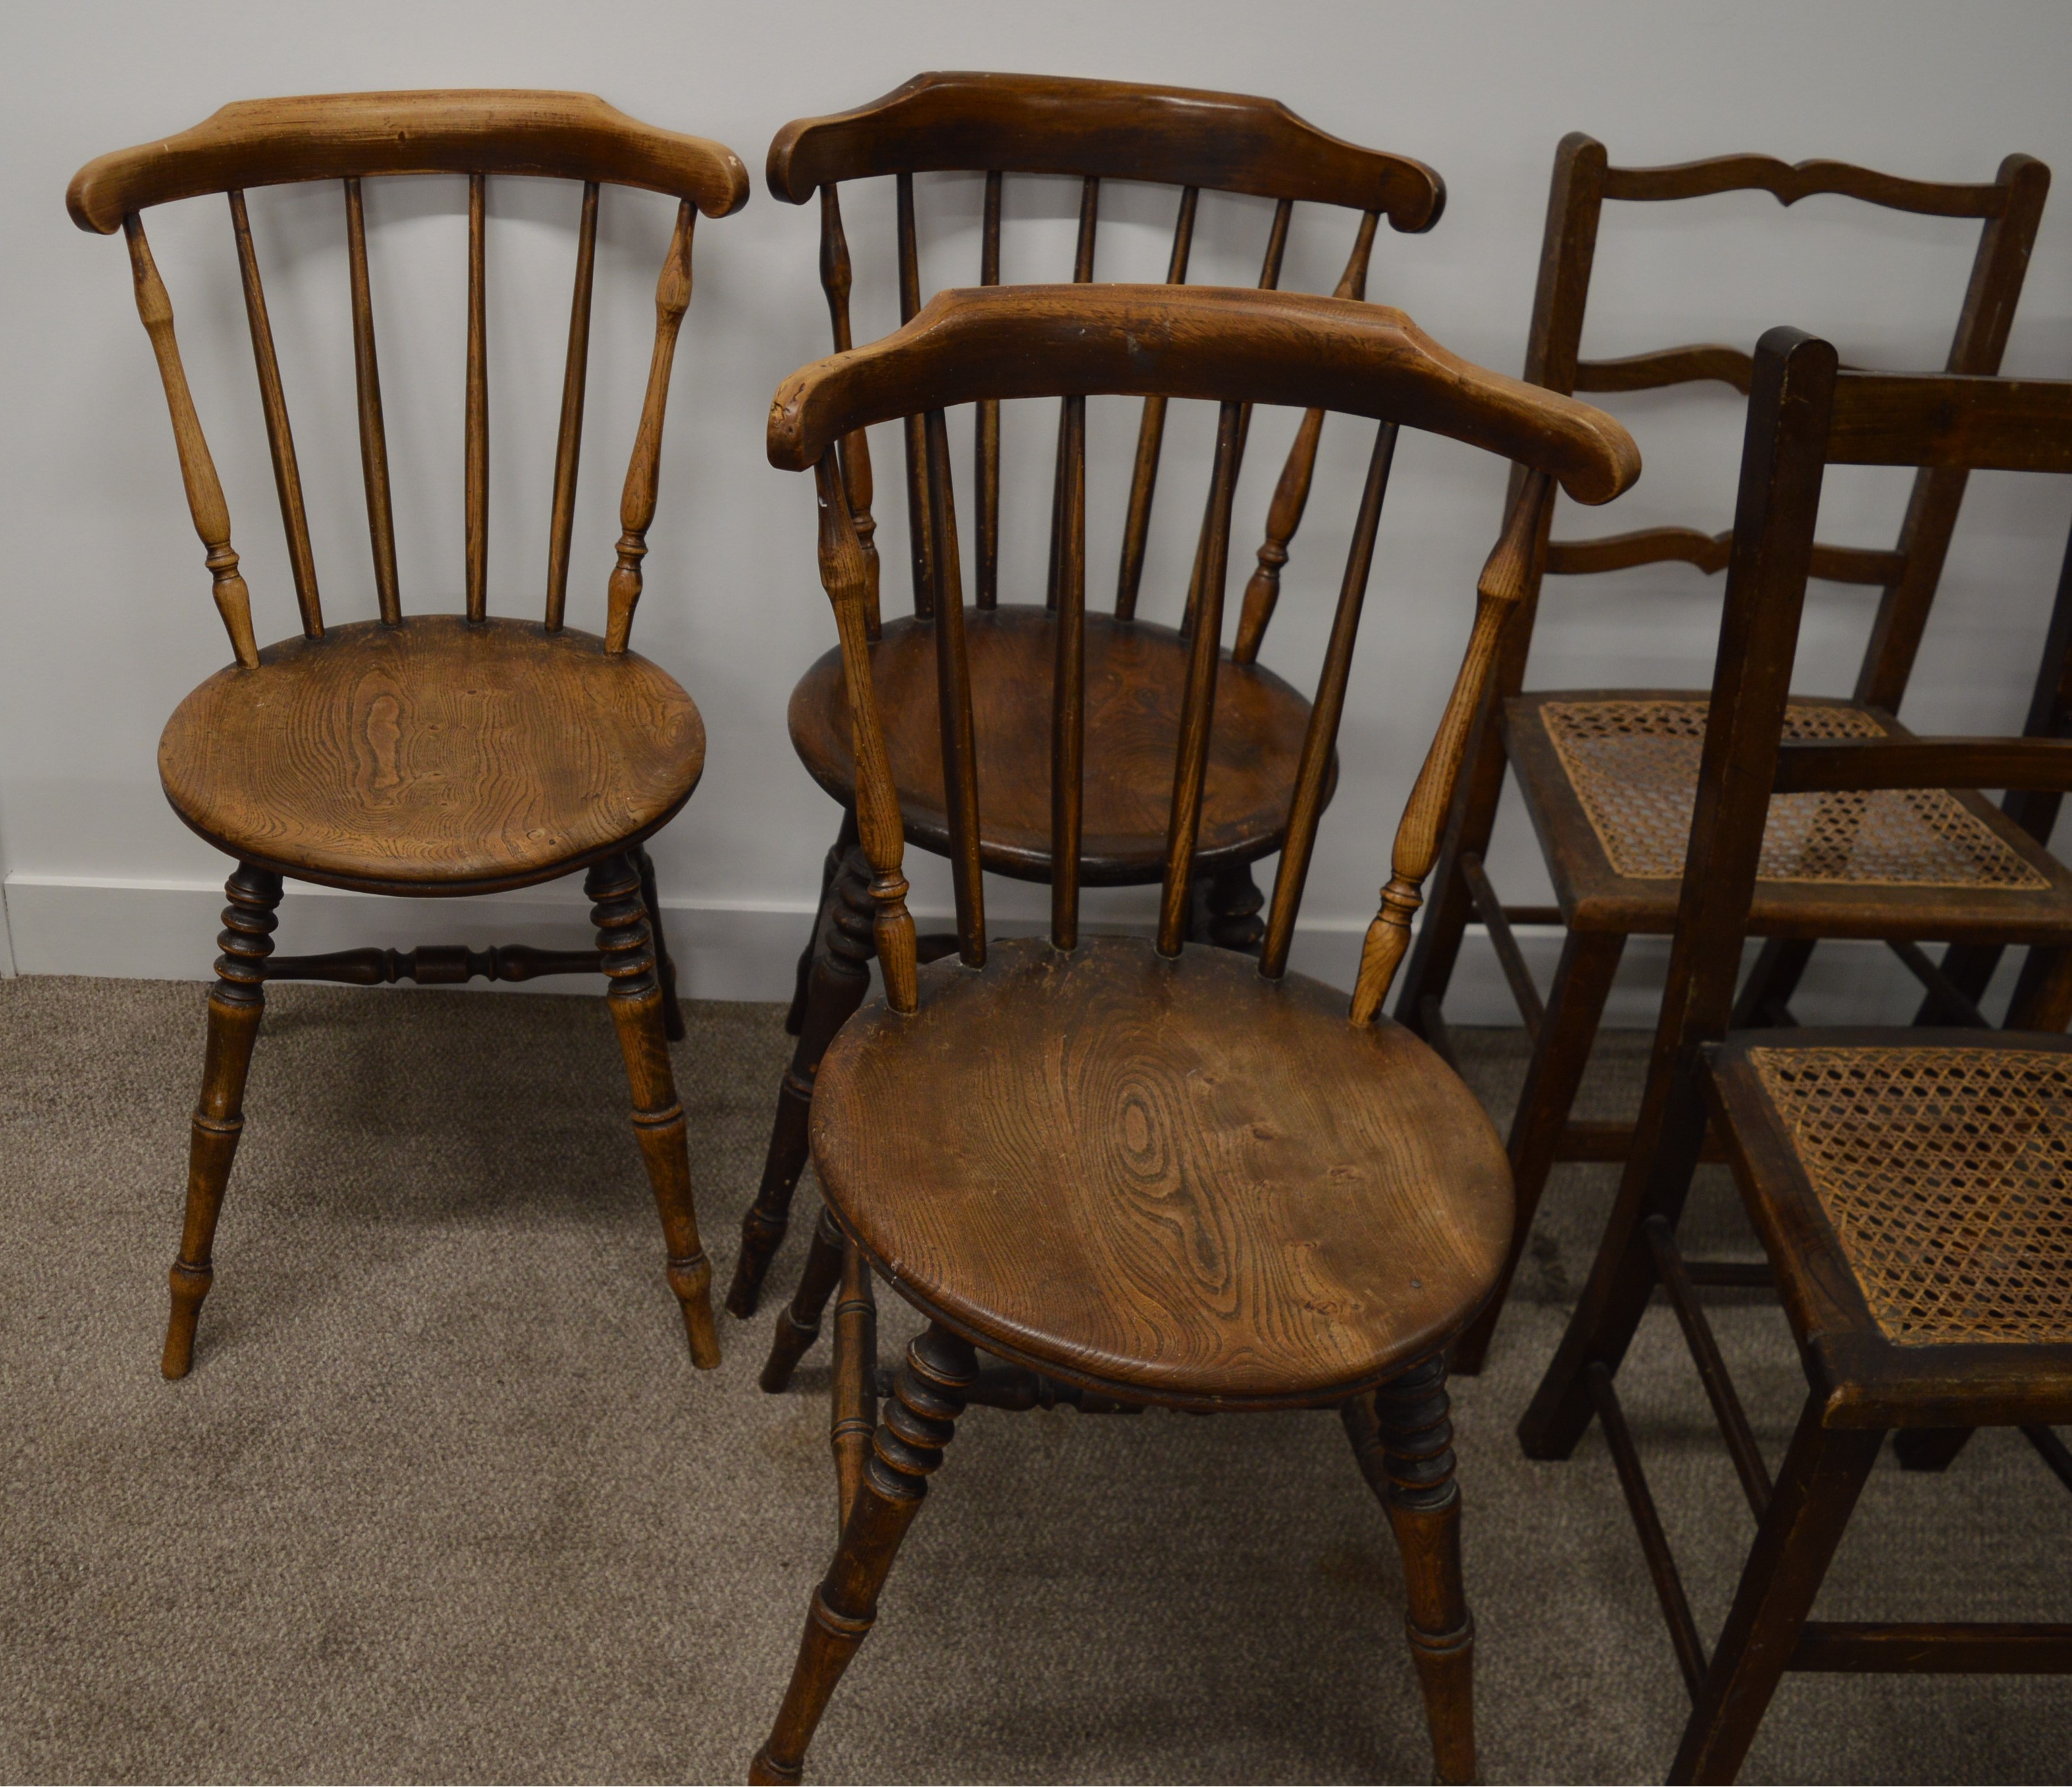 3 bedroom chairs (HT85cm W39cm) and 3 late 19th early 20th century spindle back kitchen chairs ( - Image 2 of 3